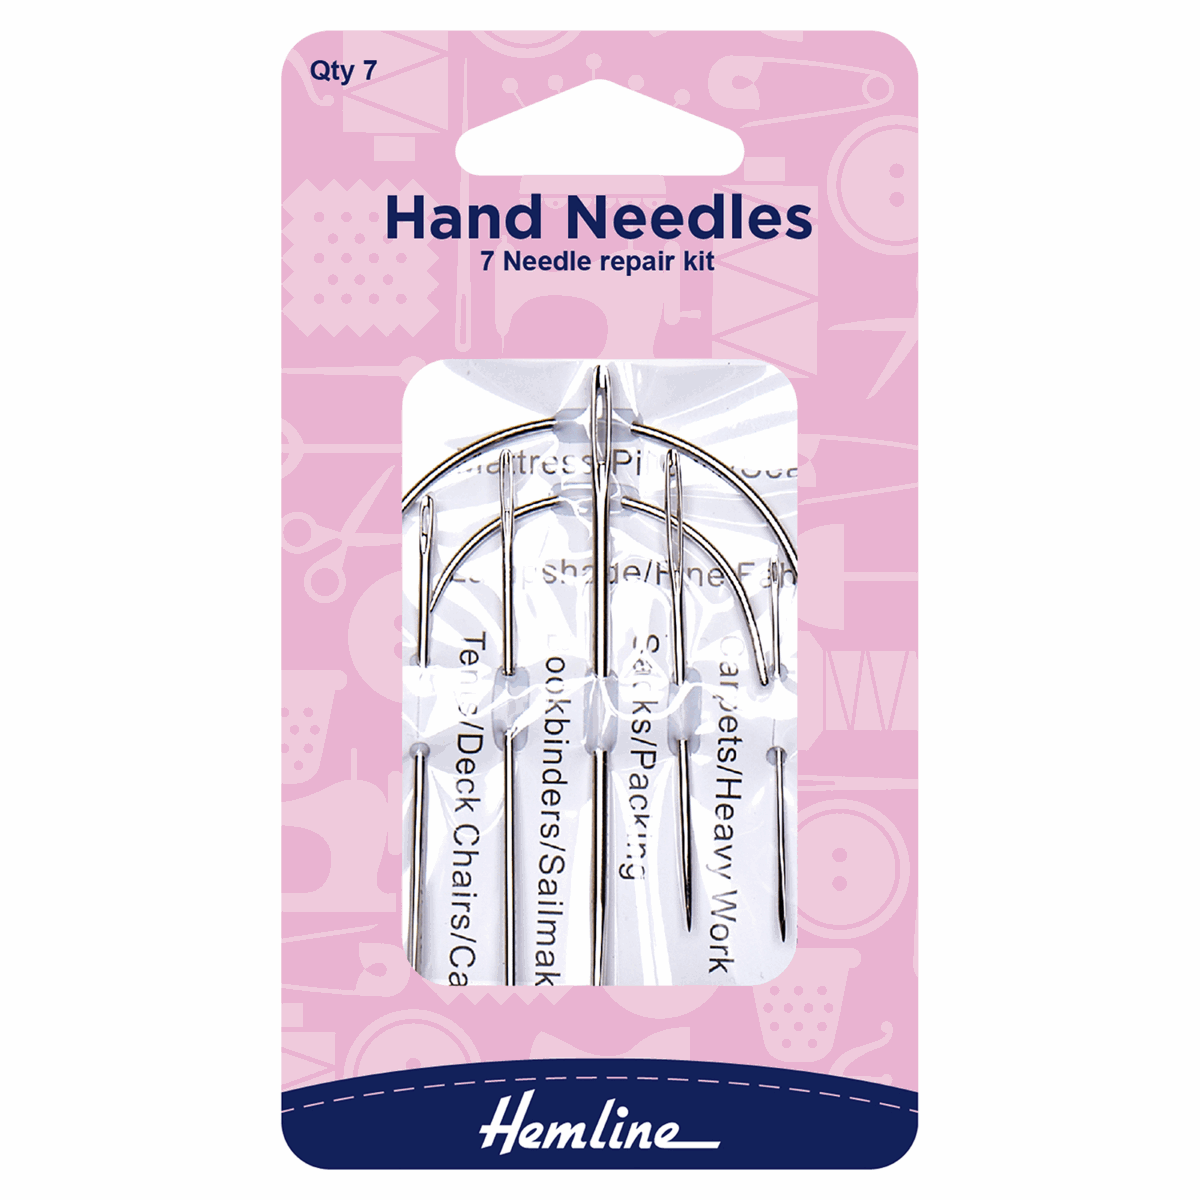 Hand Sewing Repair Needles: 7 Pieces